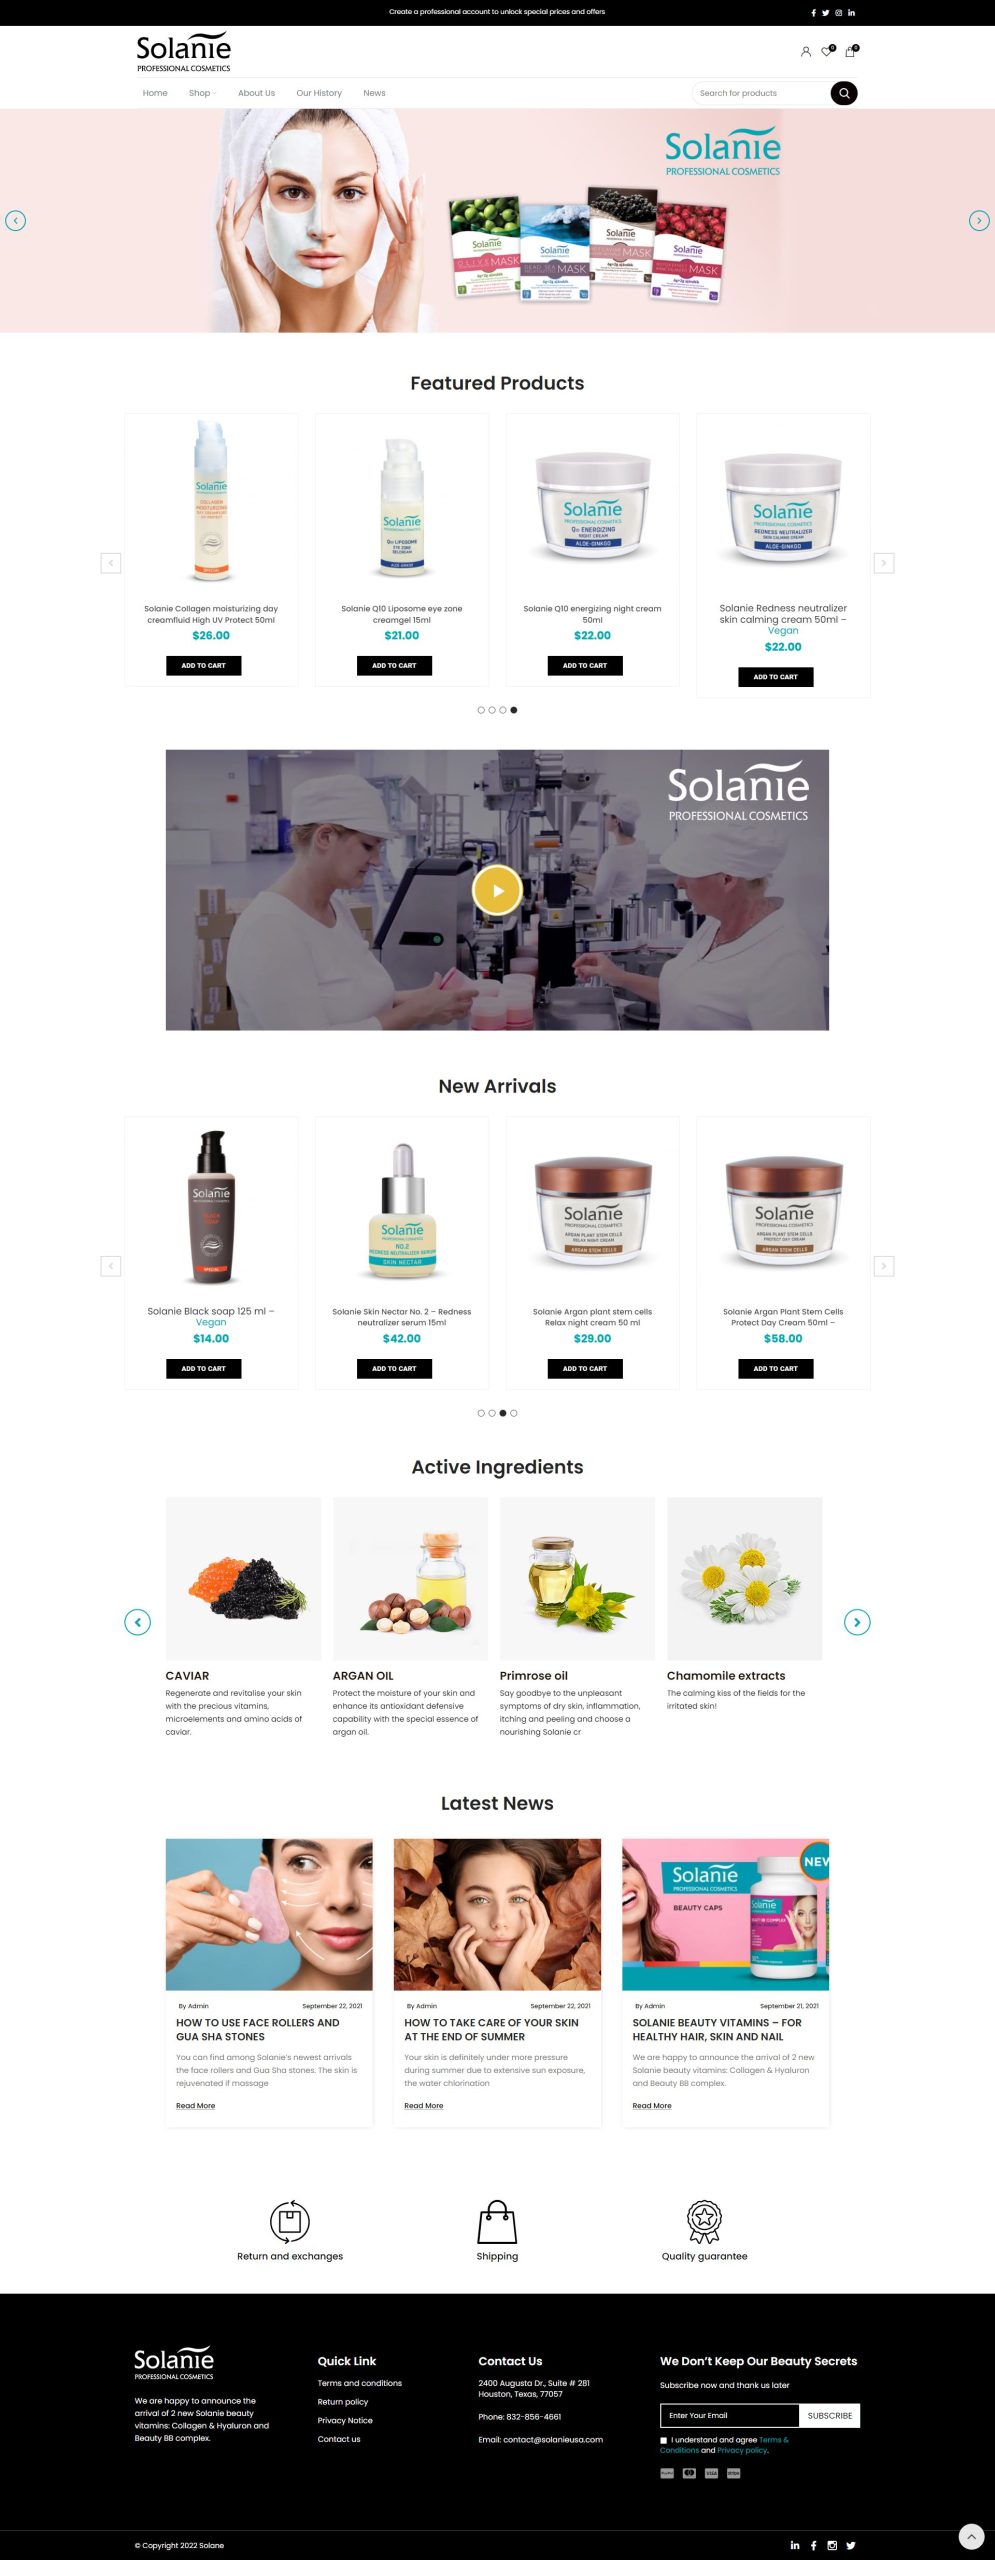 TAIBACreations Solanie is a full-featured eCommerce website. In the first phase, our designing team wireframed the design and then built it as a professional eCommerce store.